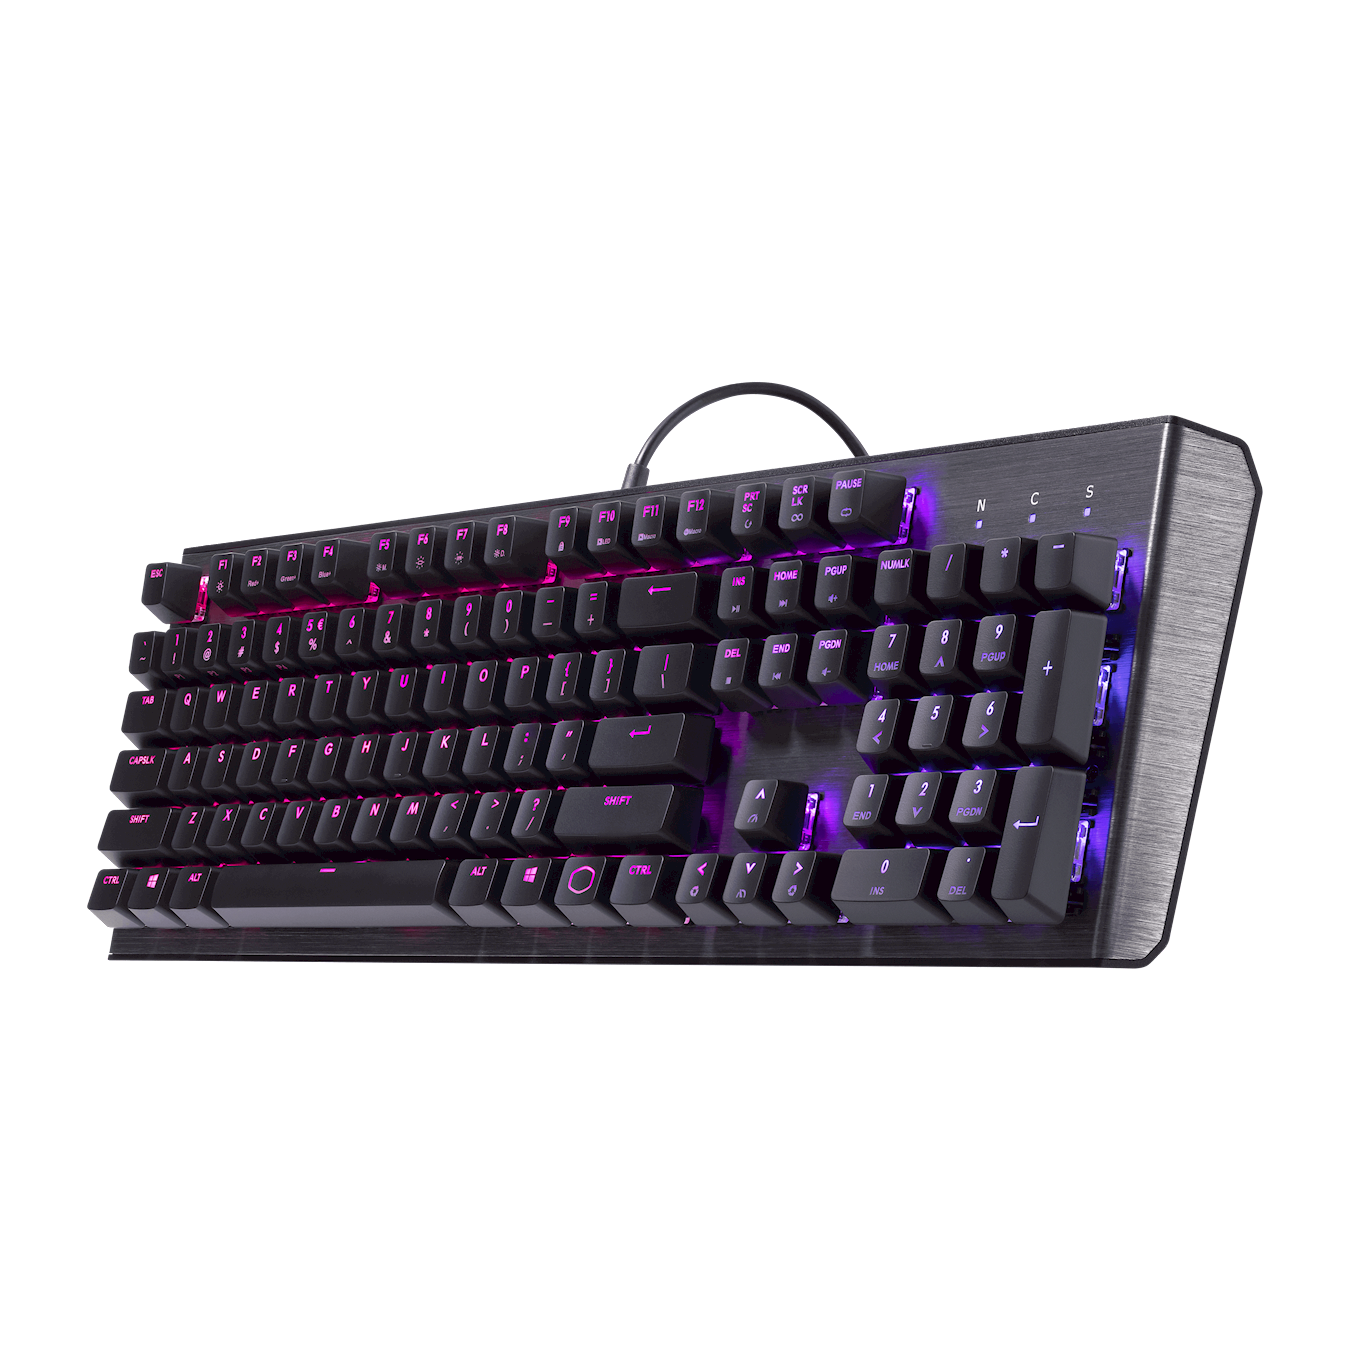 CK550 RGB Mechanical Gaming Keyboard -rated for a 50 million+ lifepan to never let you down in the heat of battle